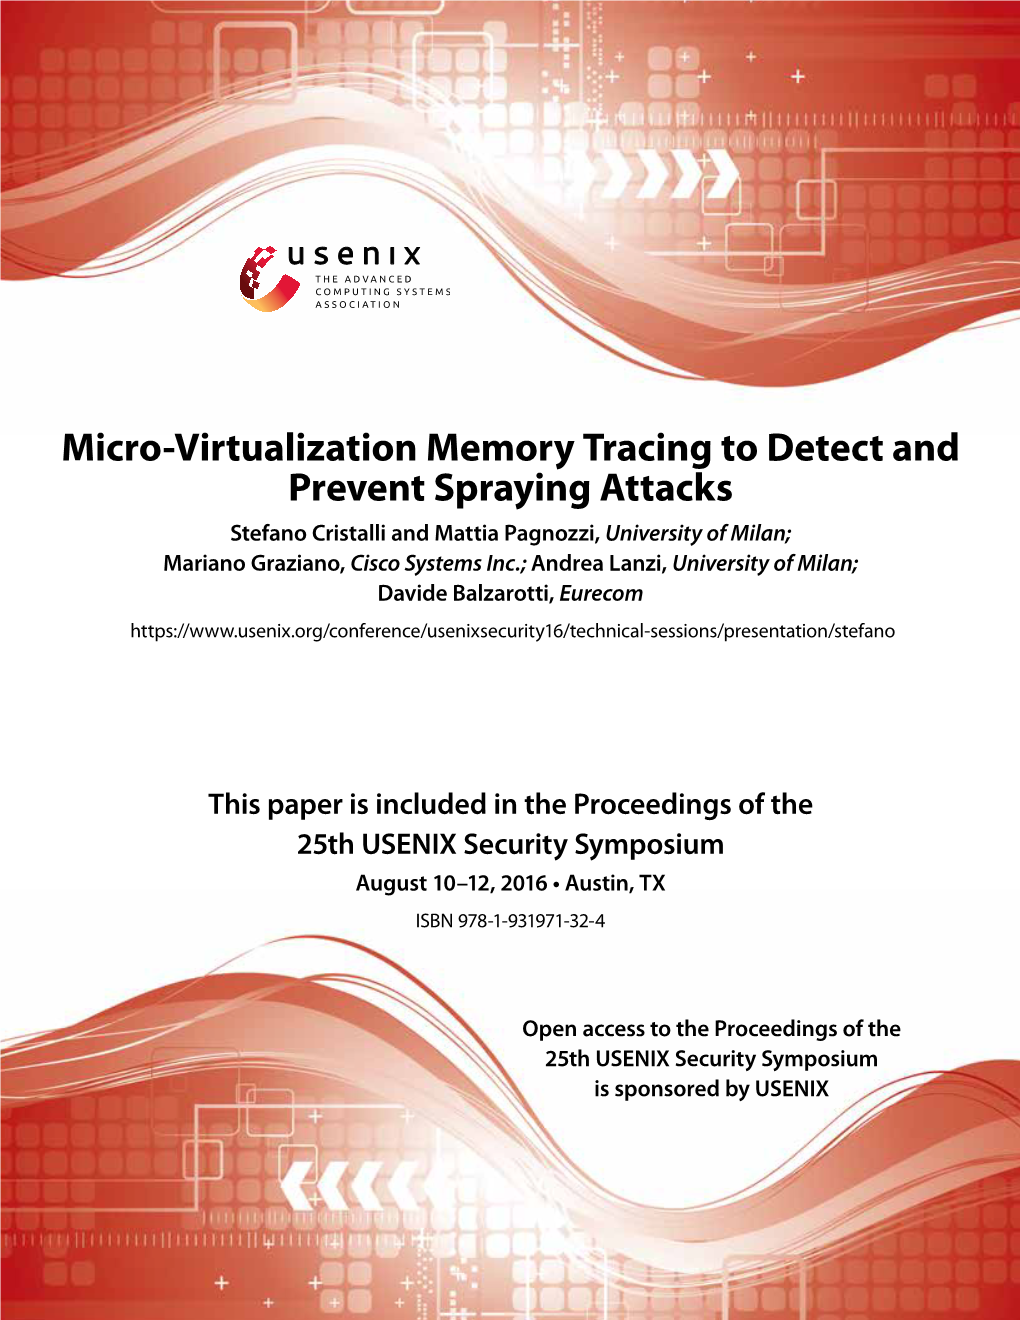 Micro-Virtualization Memory Tracing to Detect and Prevent Spraying Attacks